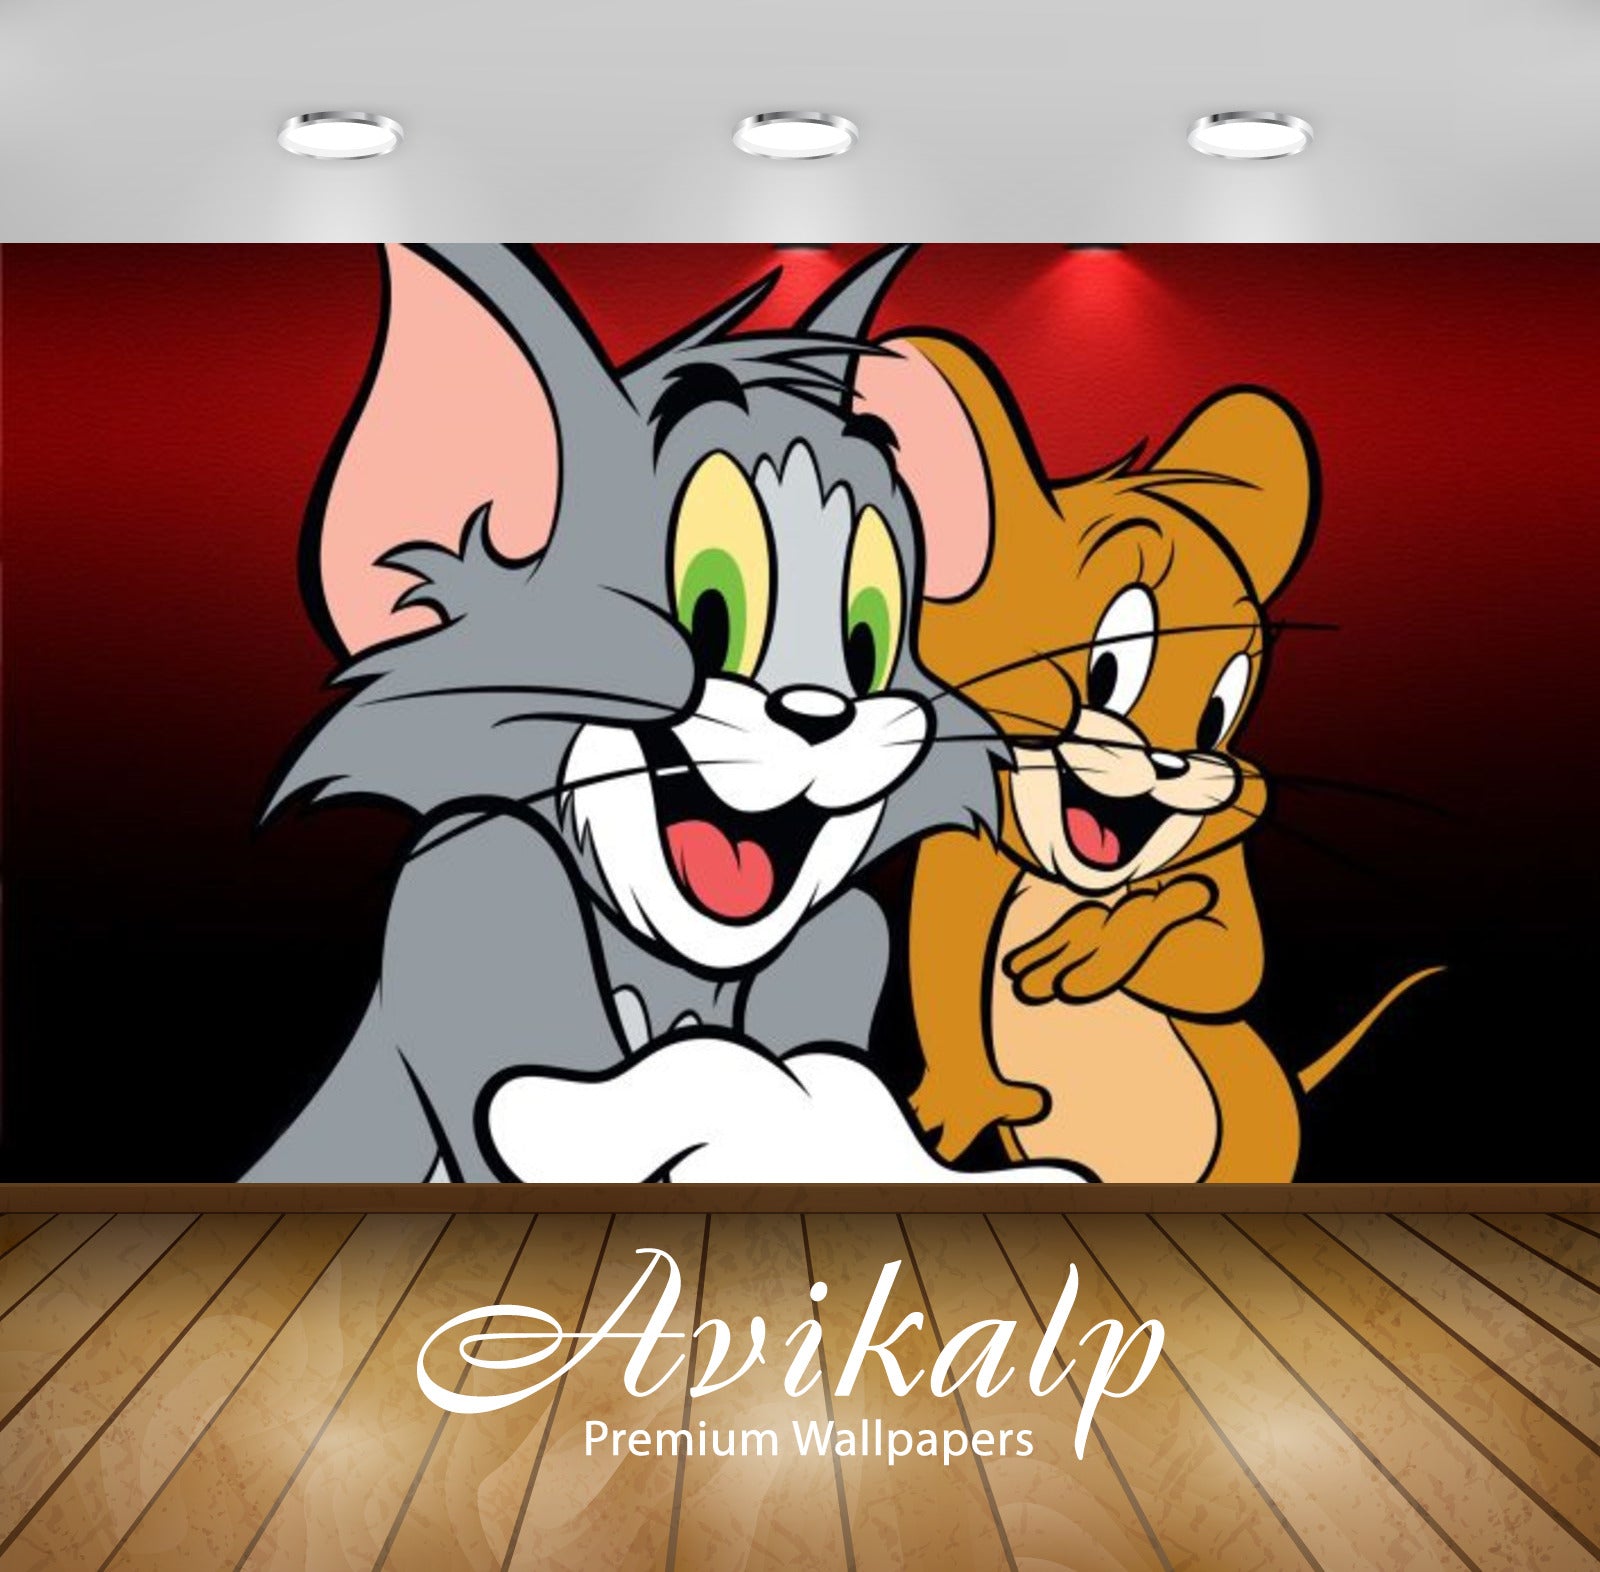 Avikalp Exclusive Awi2259 Tom and Jerry Full HD Wallpapers for Living room, Hall, Kids Room, Kitchen